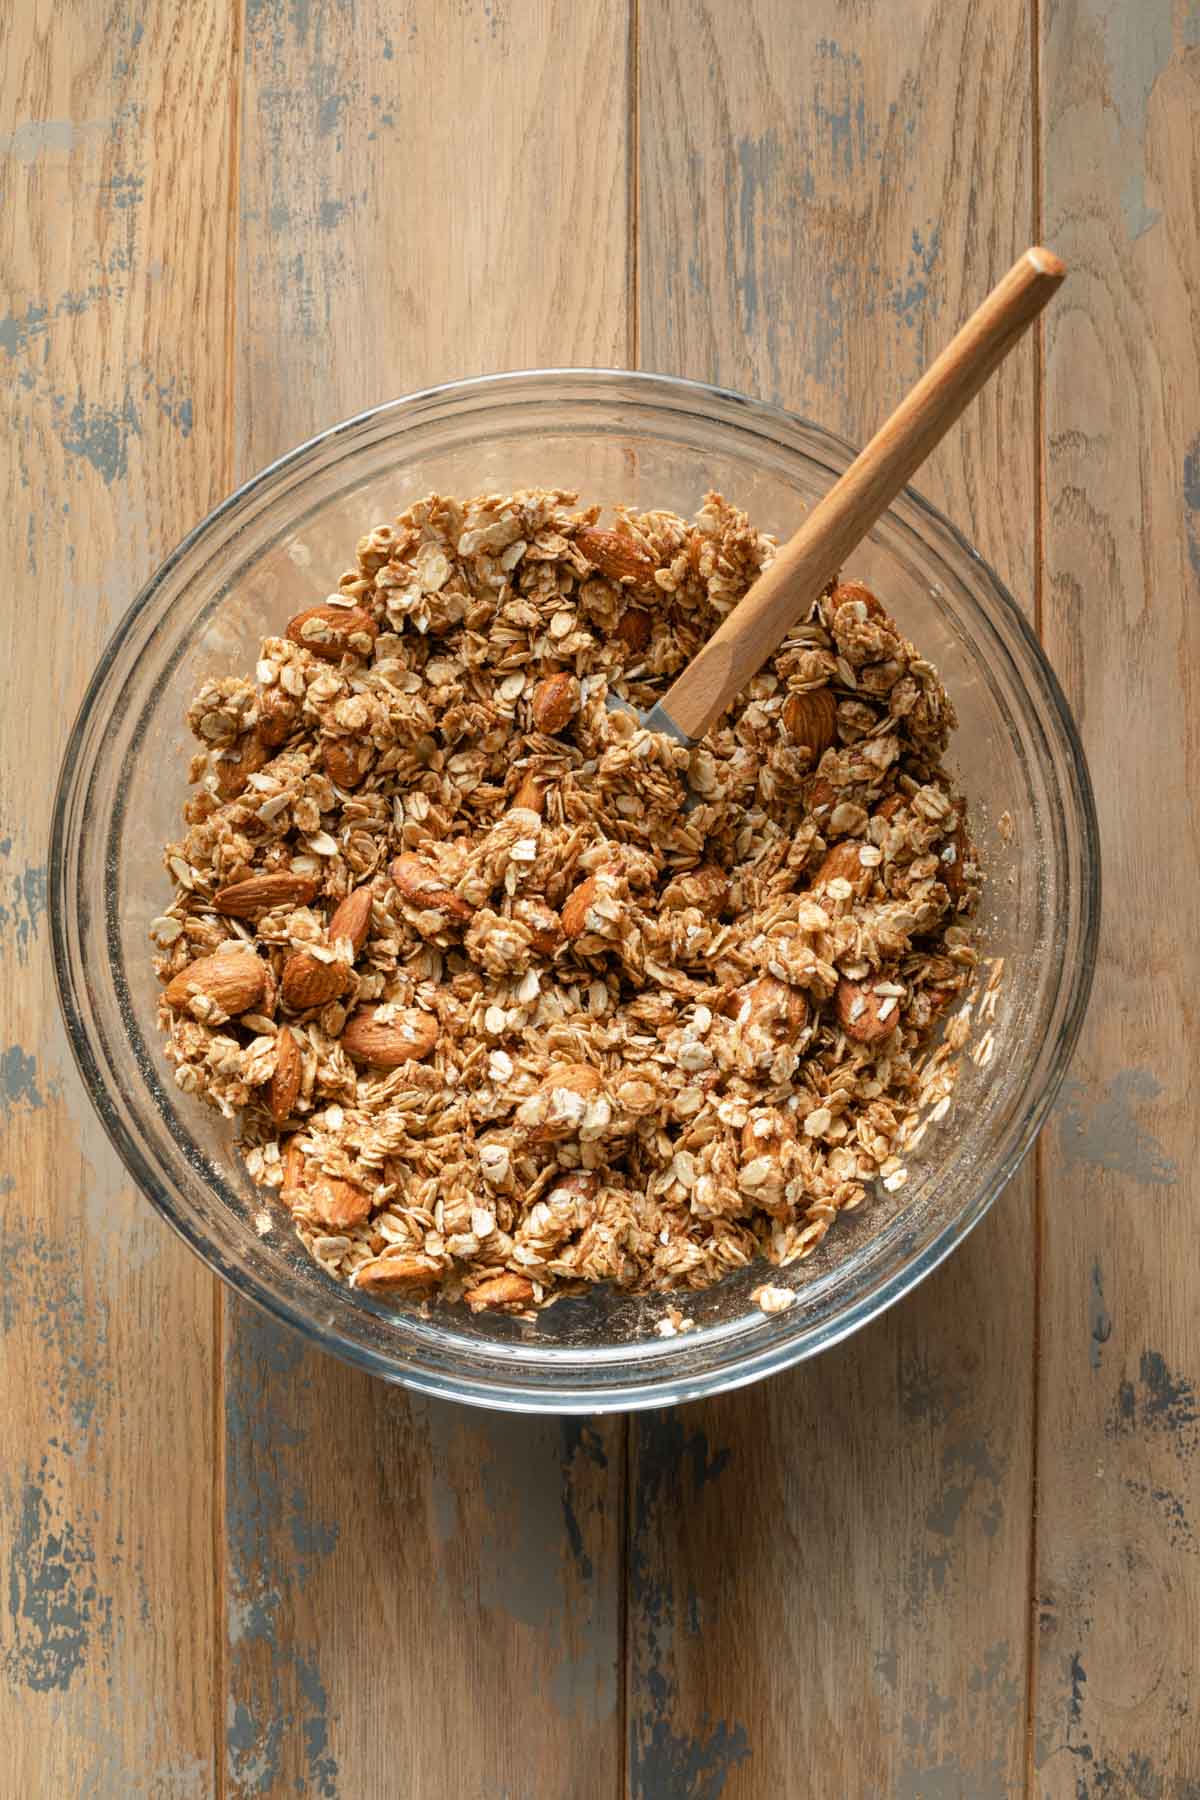 Wet granola mixture in a glass bowl with a spatula.